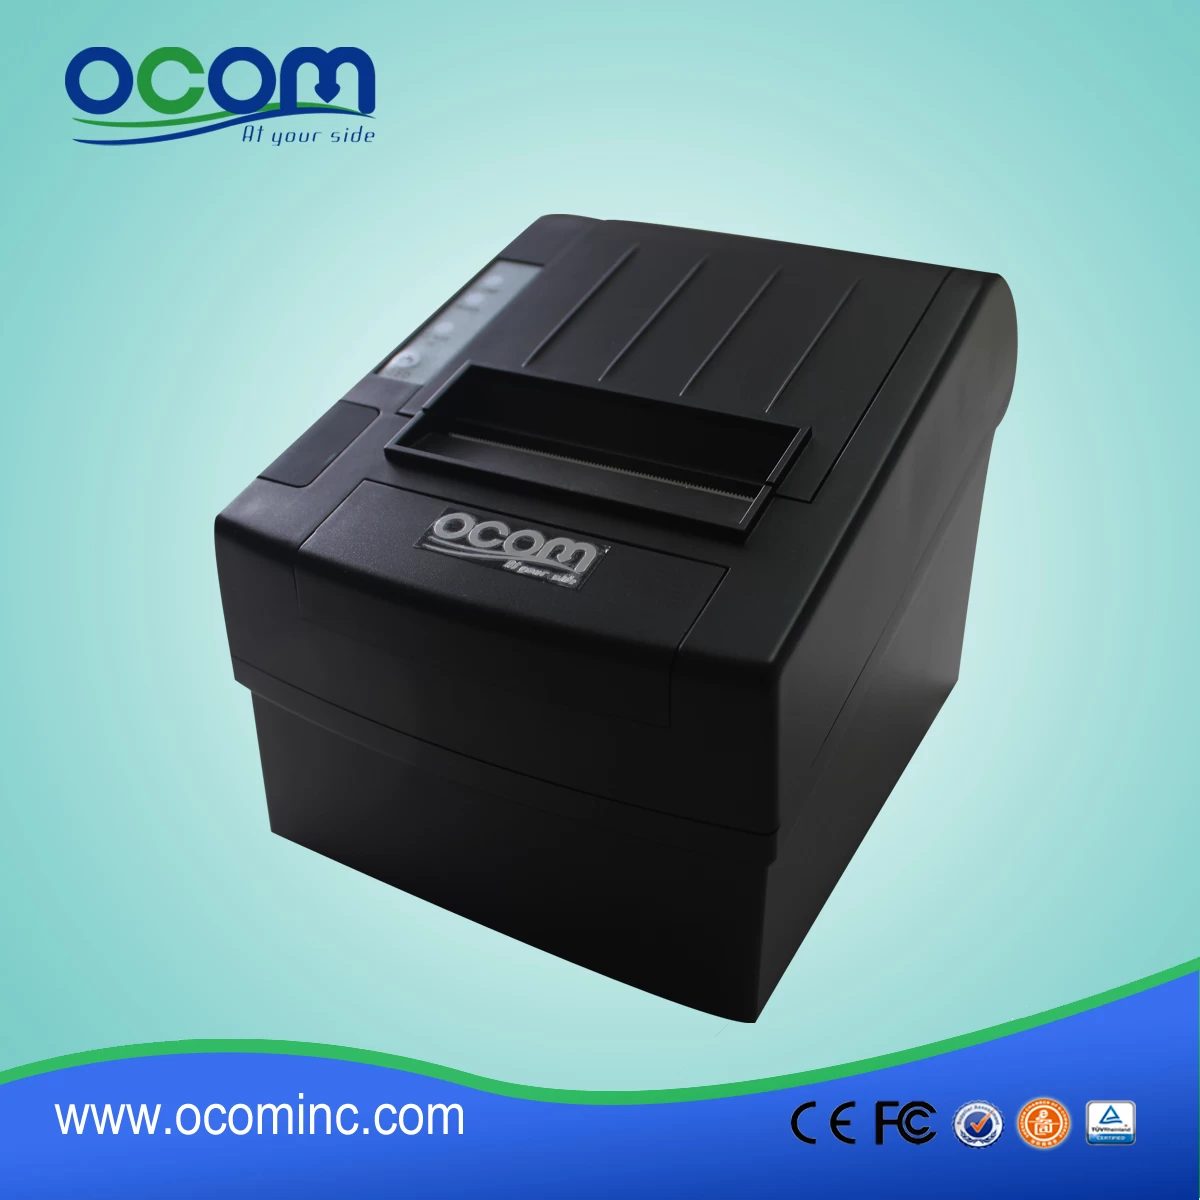 80mm Auto Cutter POS Thermal Receipt Printer